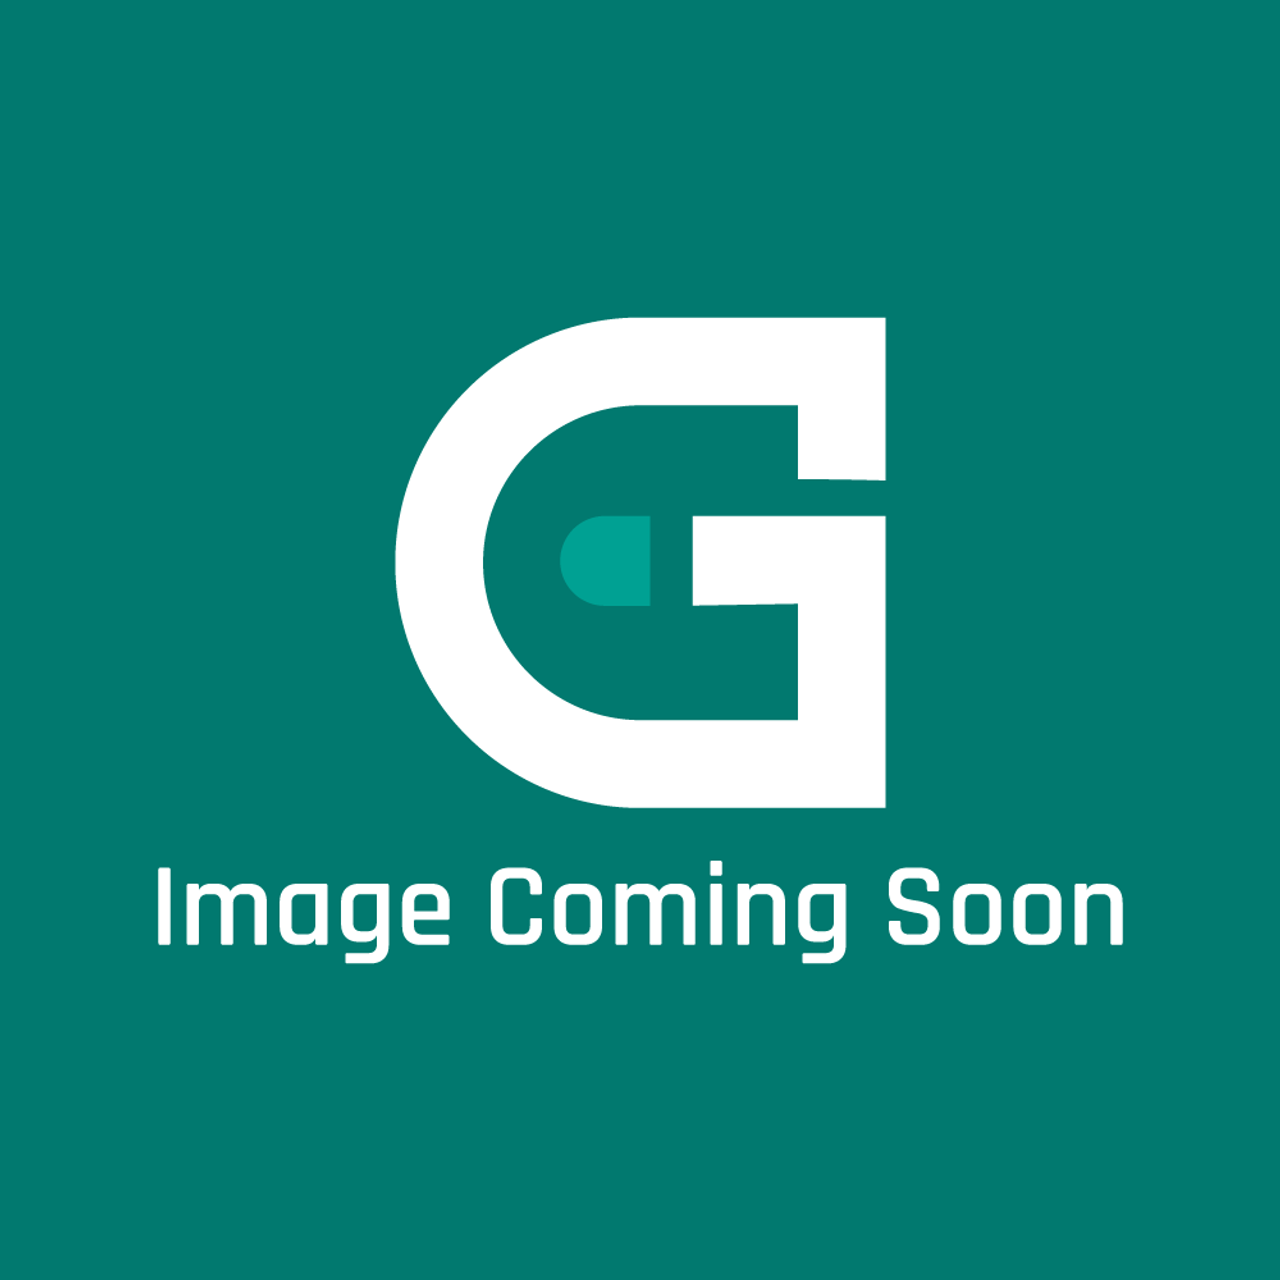 Frigidaire - Electrolux 139012500 Rack - Image Coming Soon!